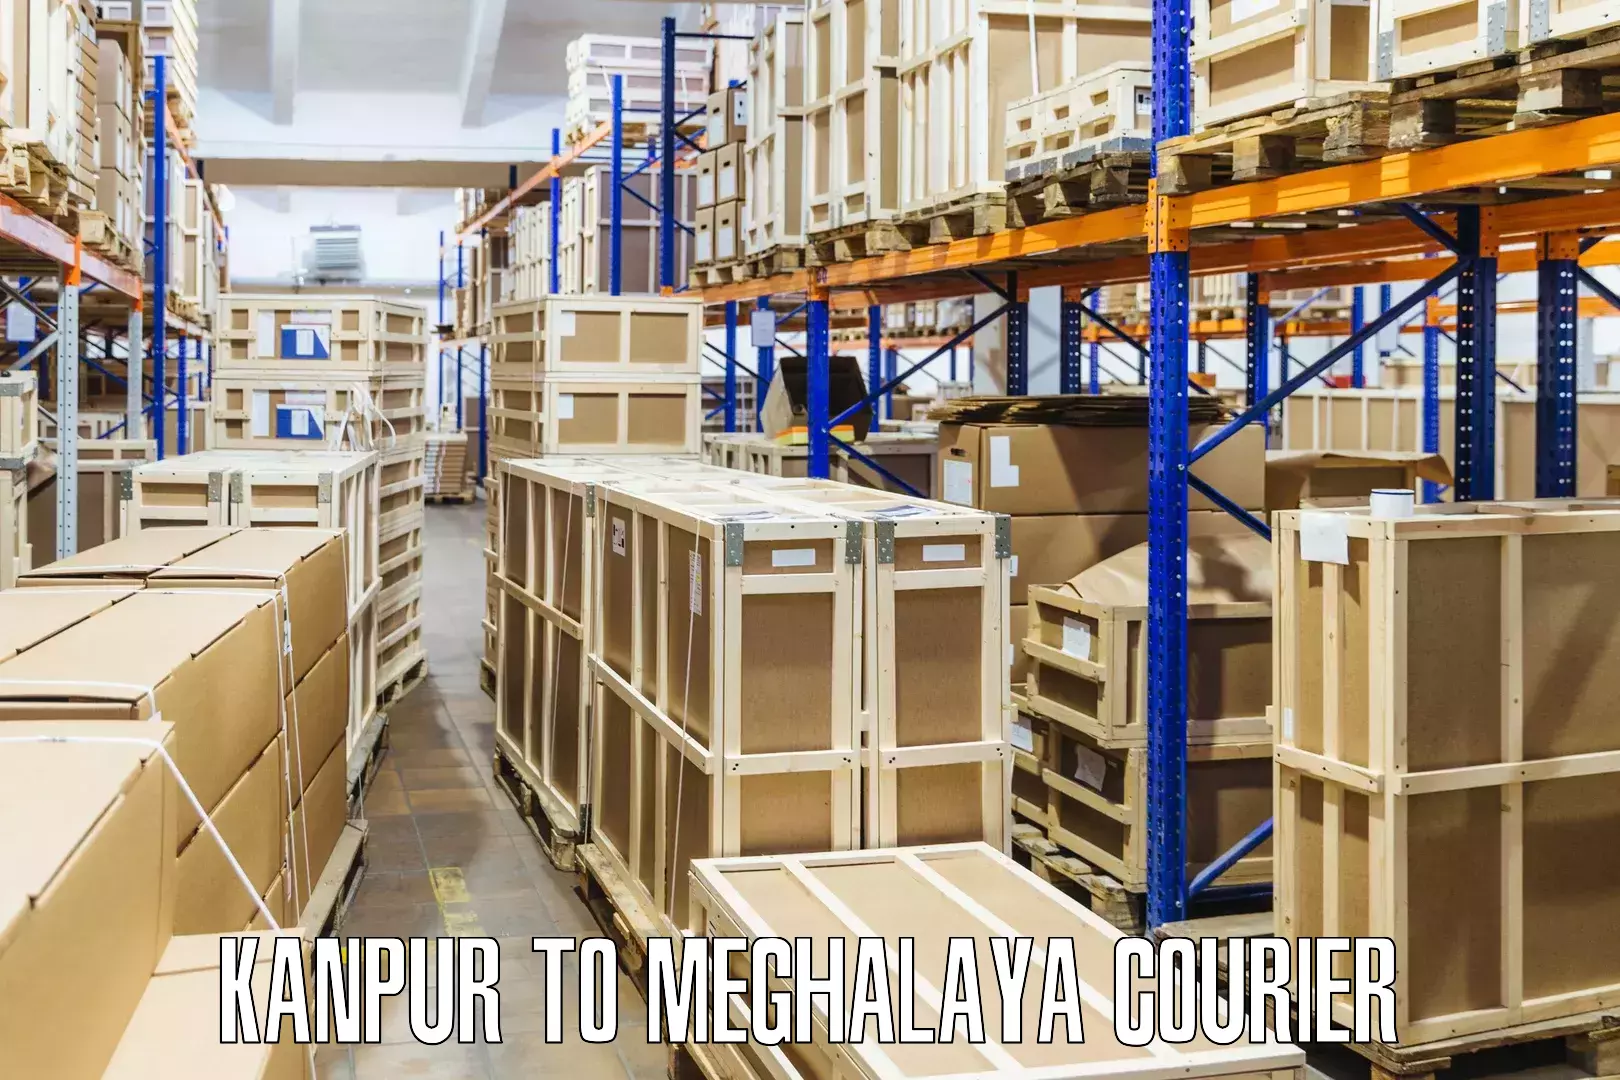 Express delivery solutions Kanpur to Meghalaya